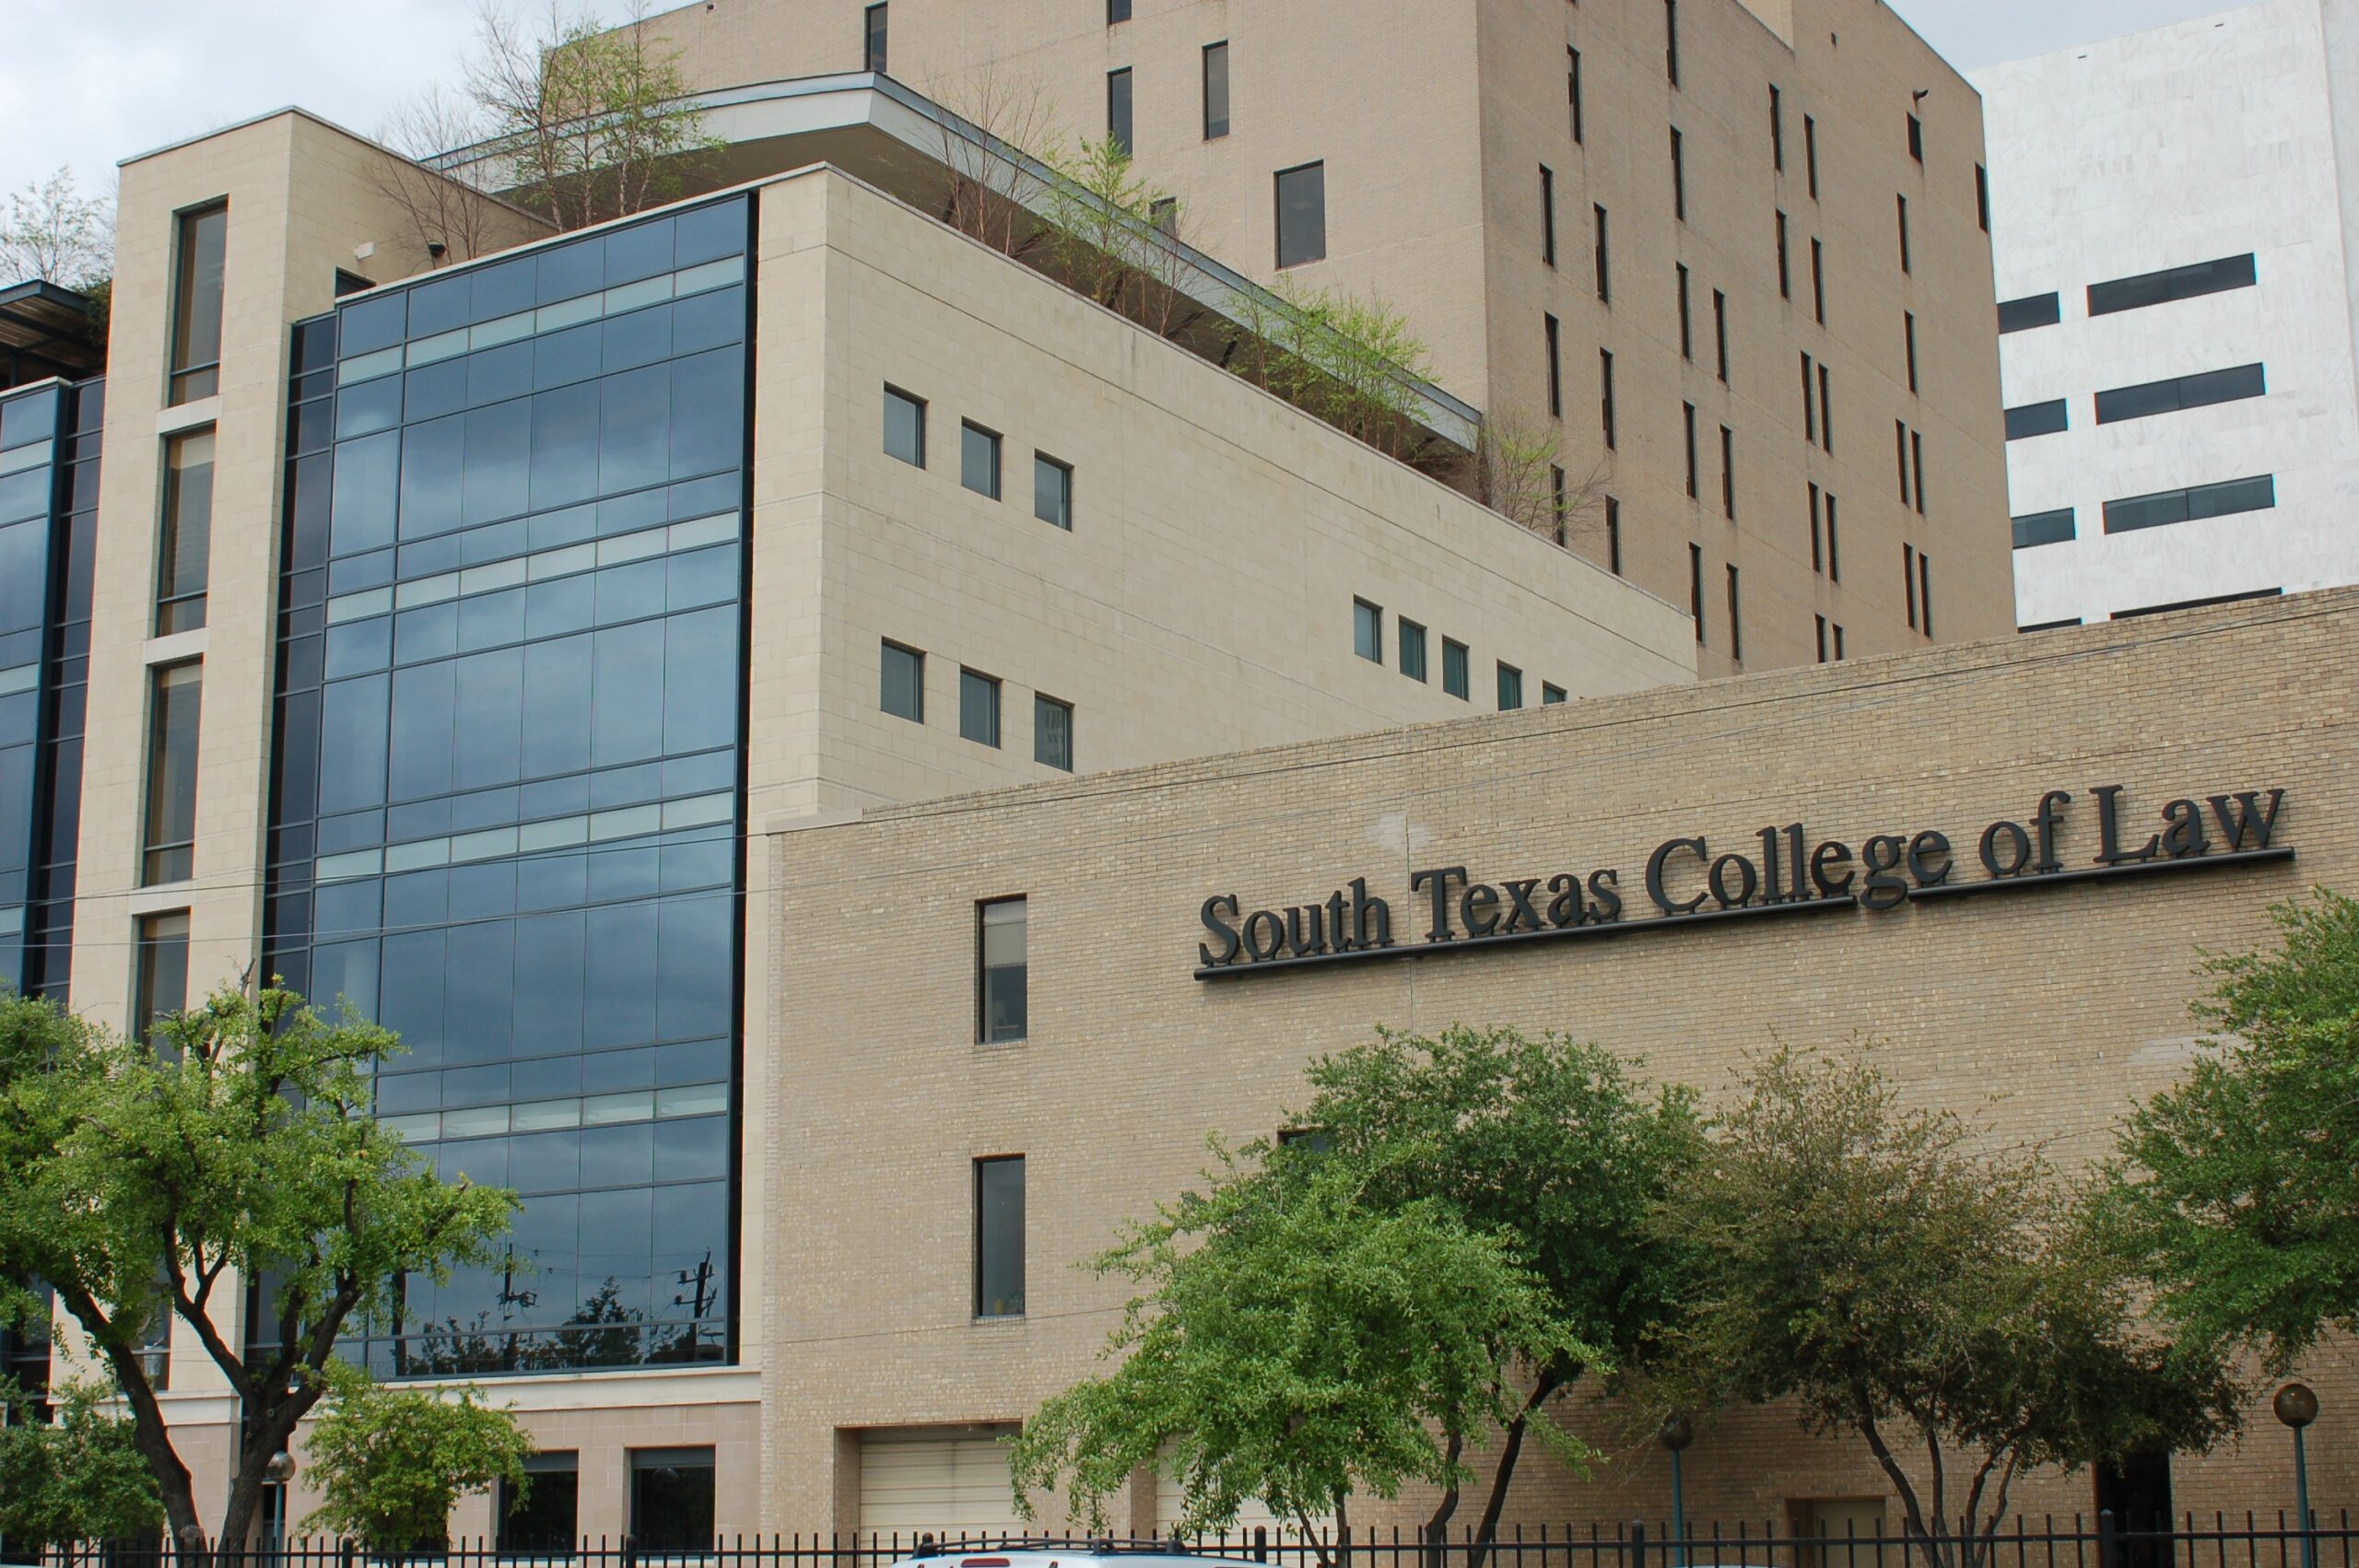 South Texas College of Law